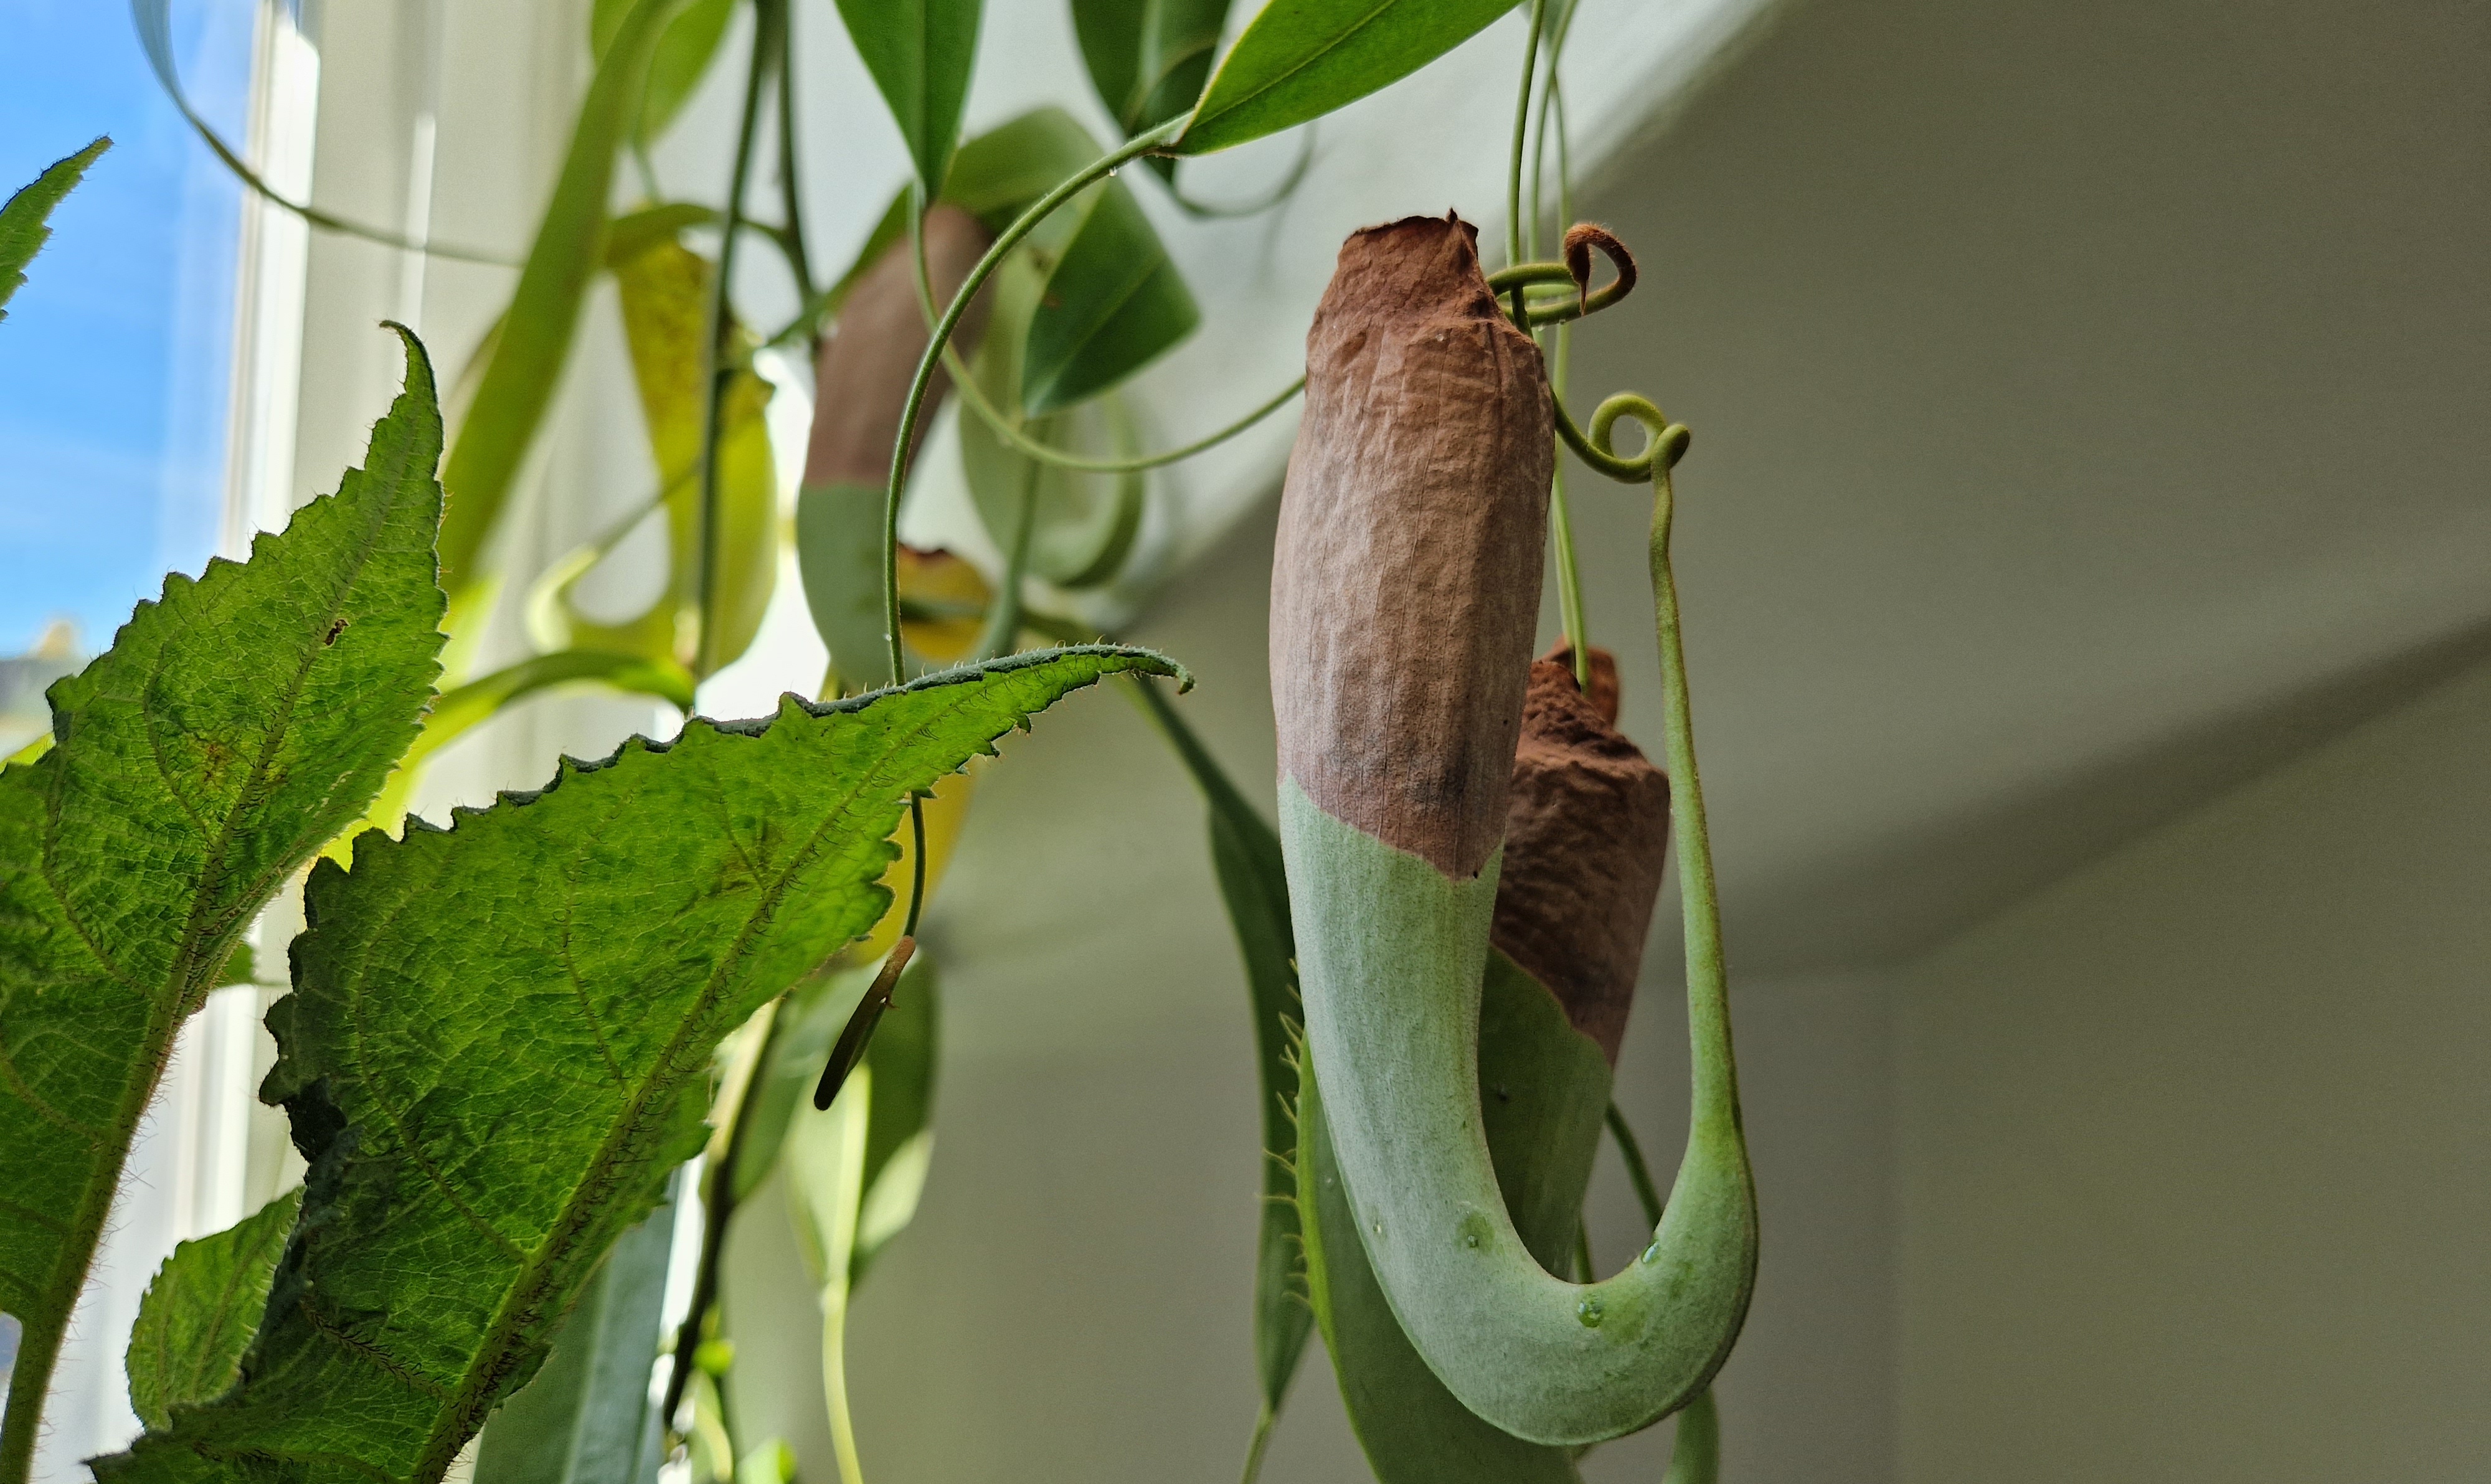 Nepenthes dry pitchers